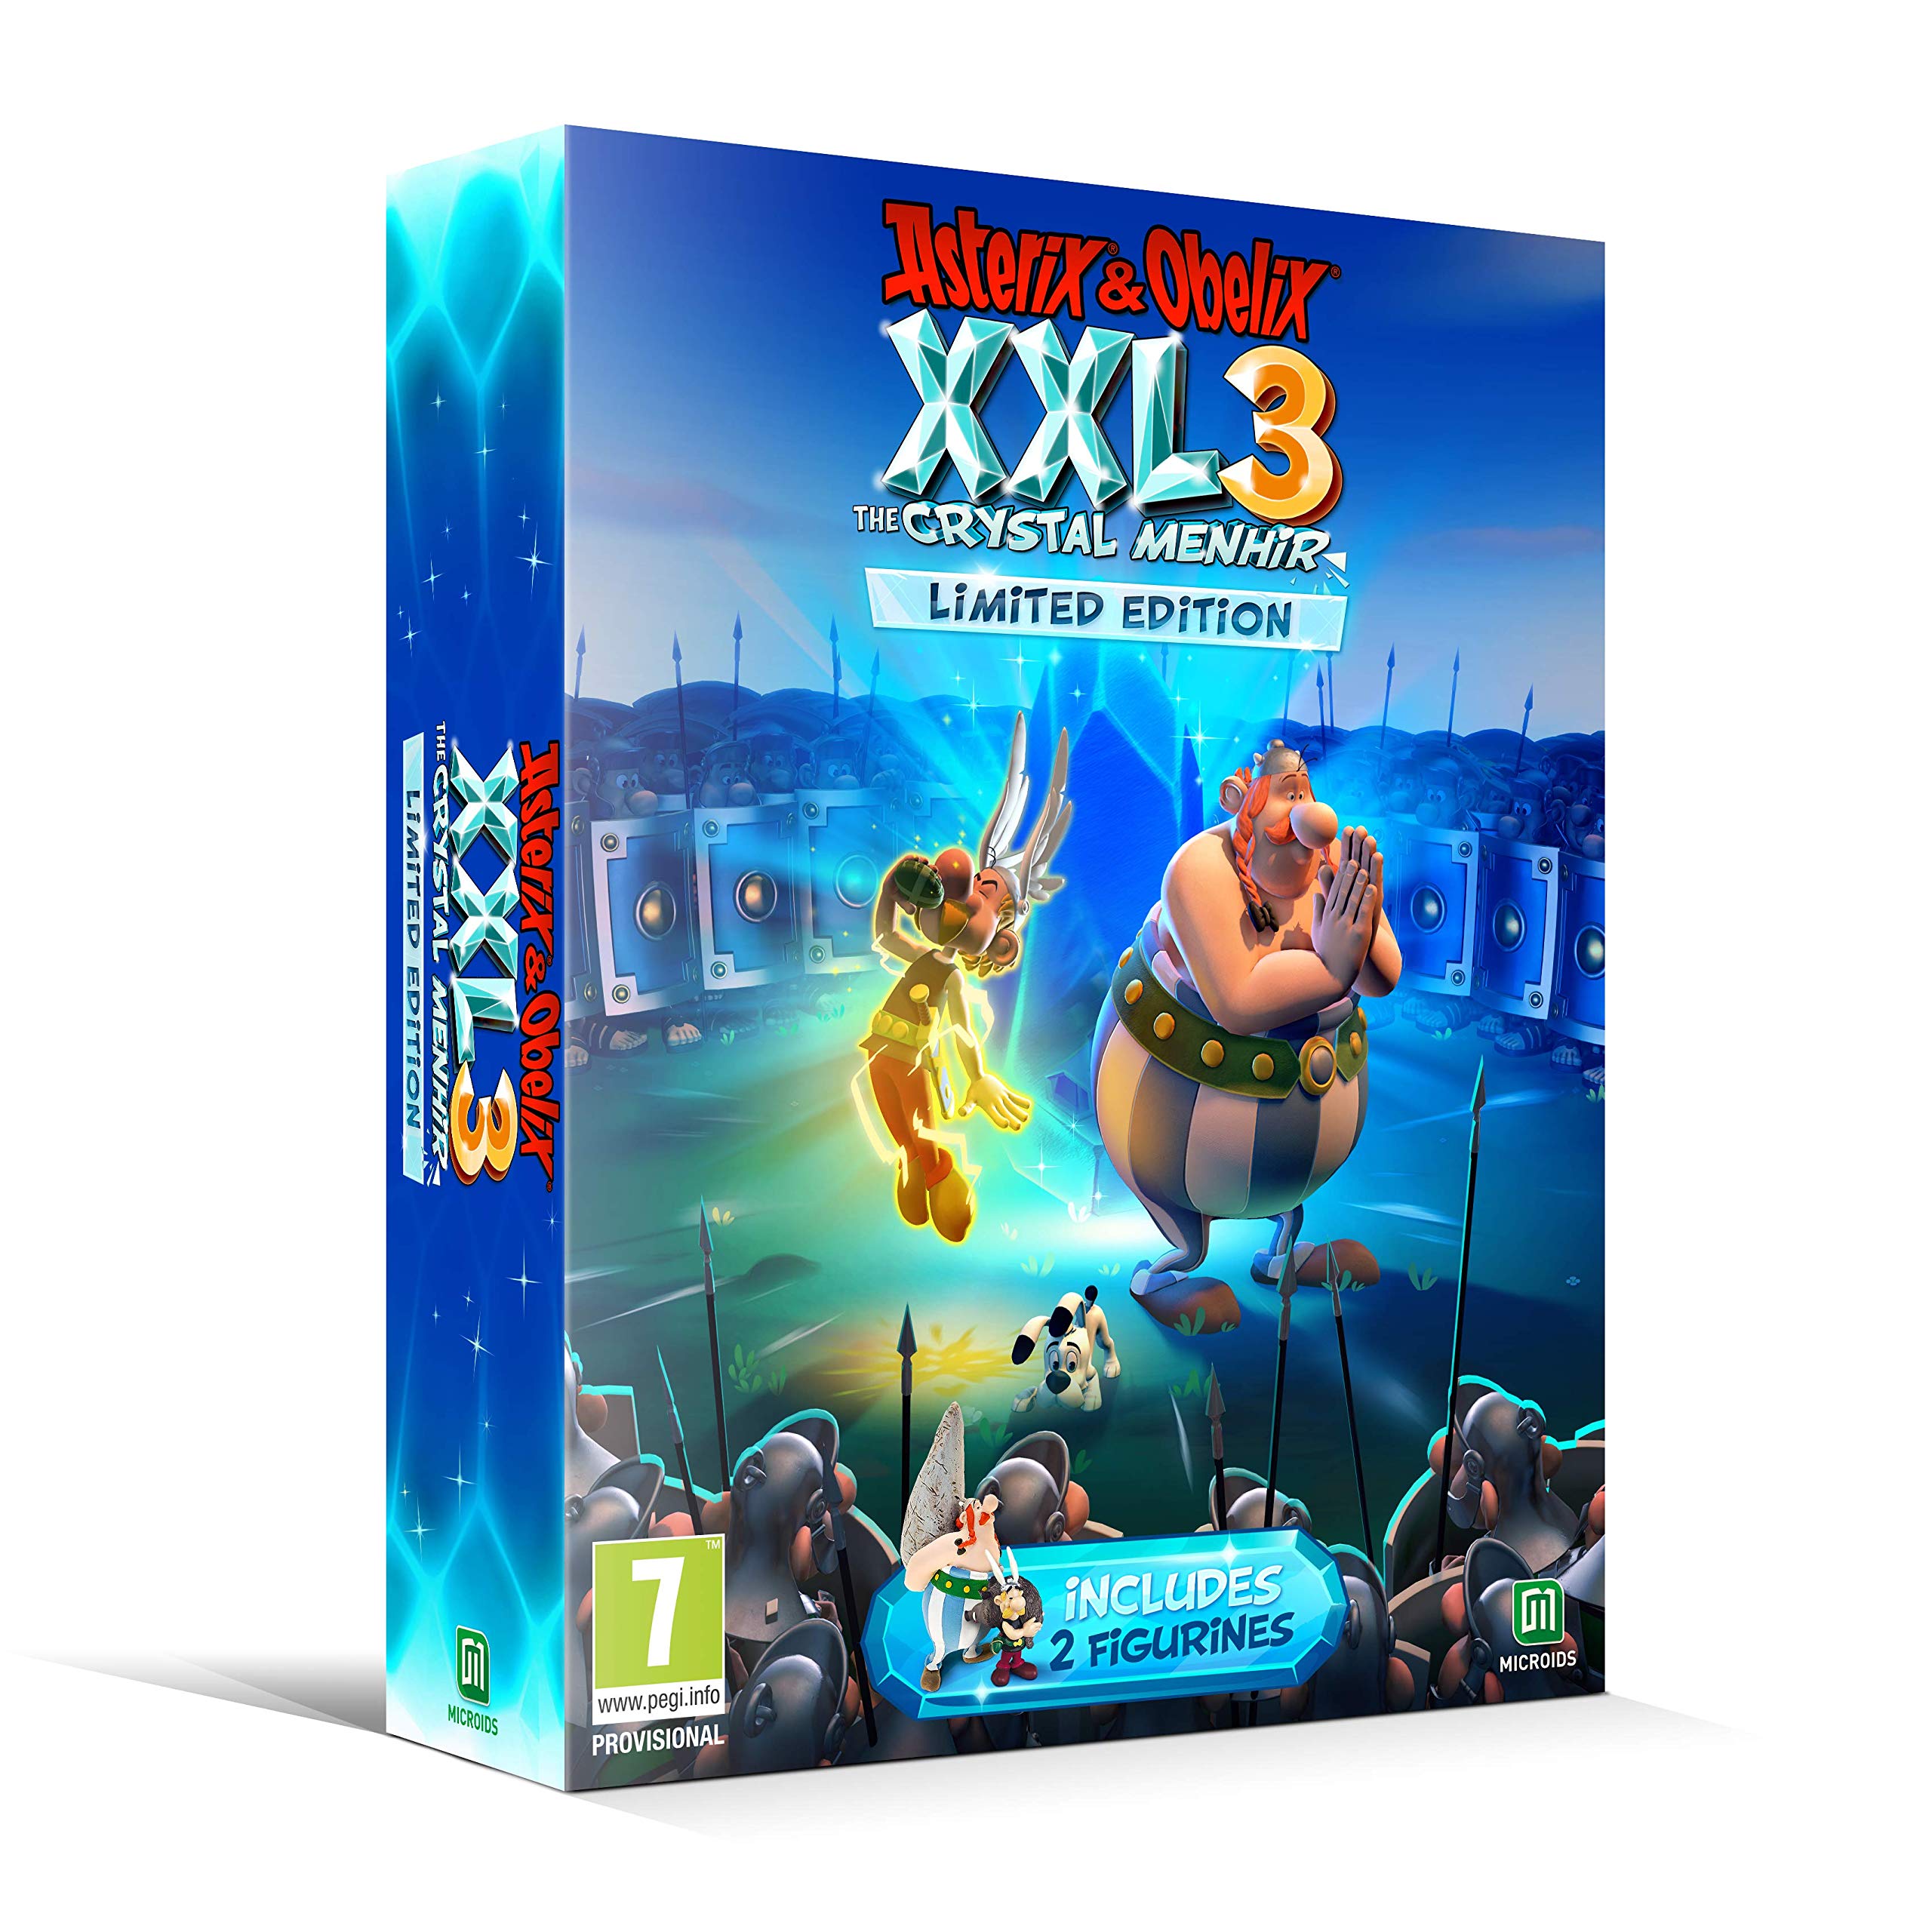 Asterix and Obelix XXL 3 The Crystal Menhir Limited Edition